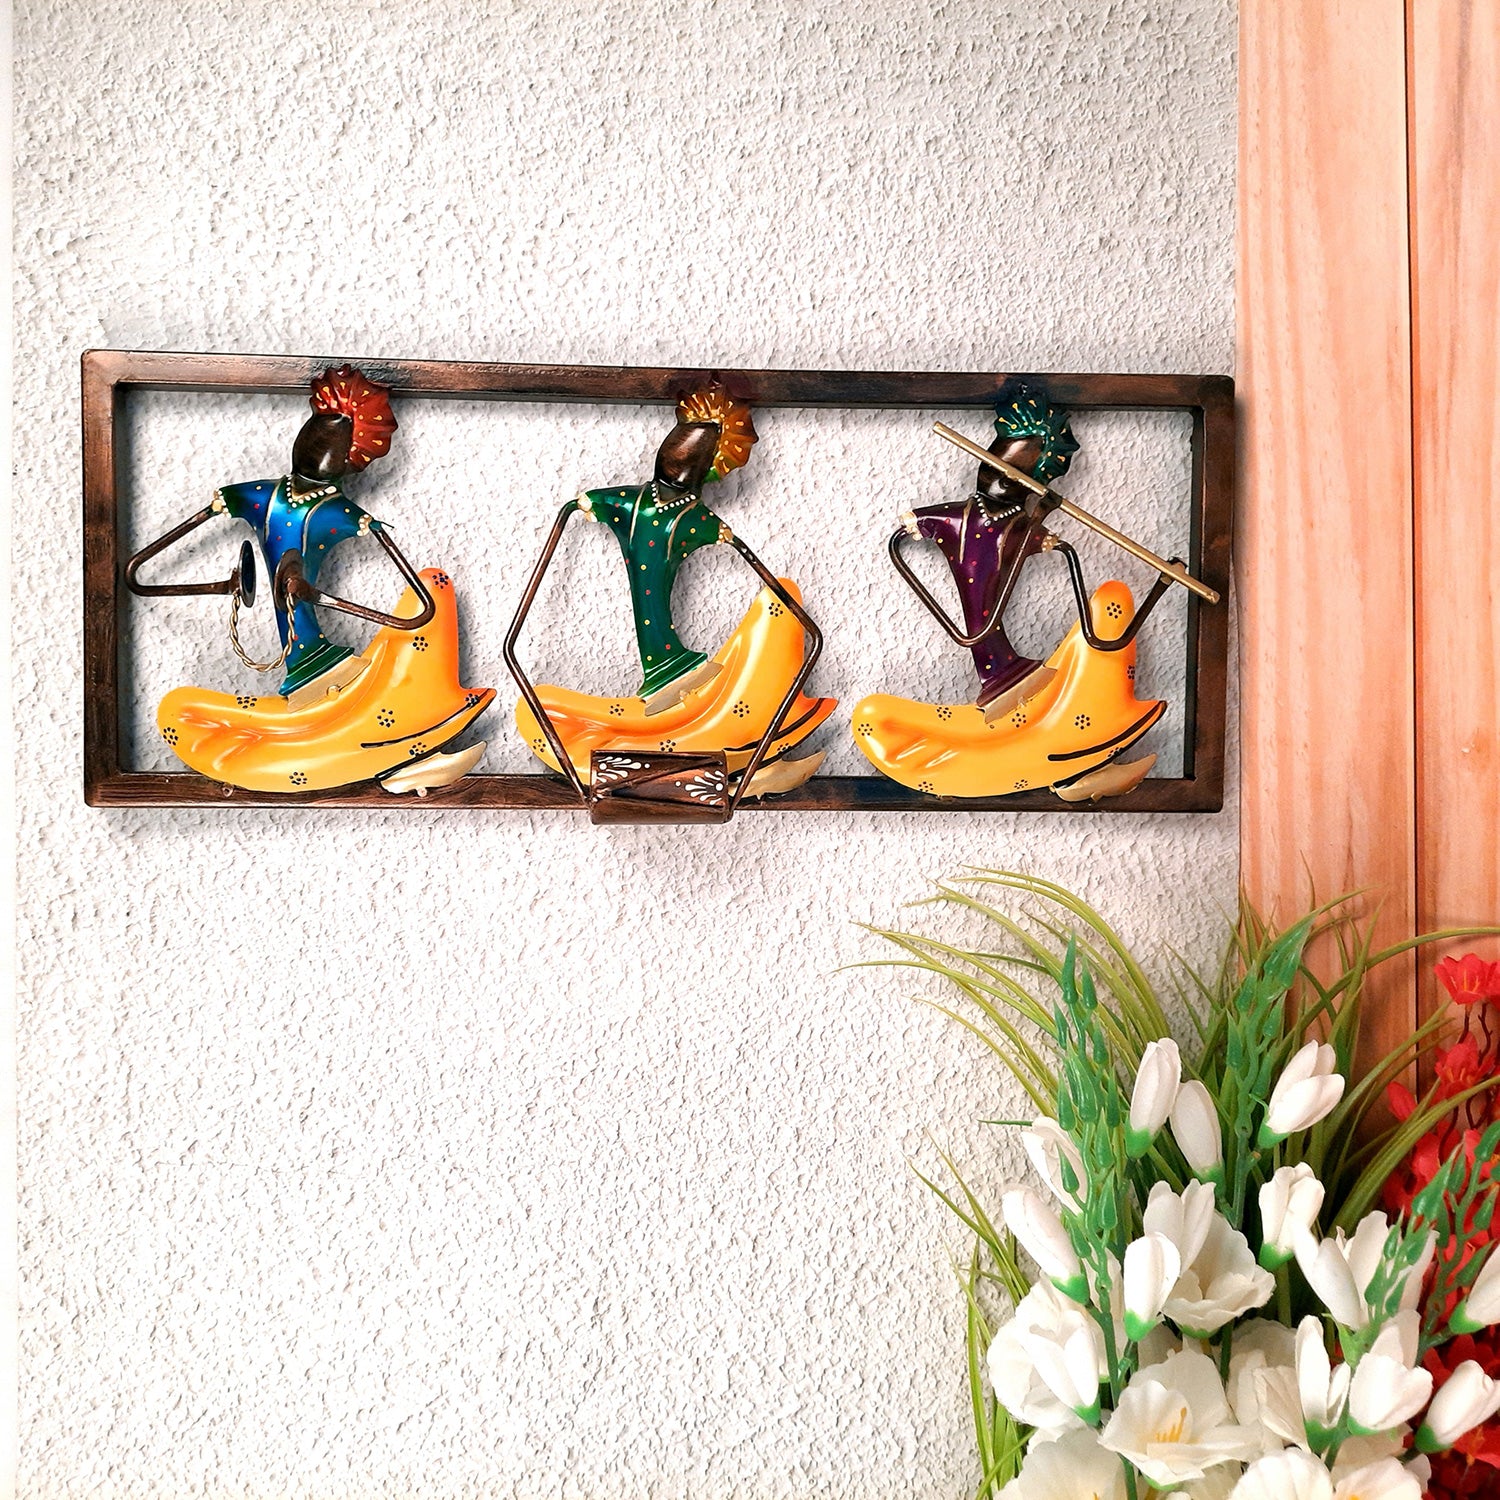 Wall Hanging, Buy Decorative Wall Hangings Online